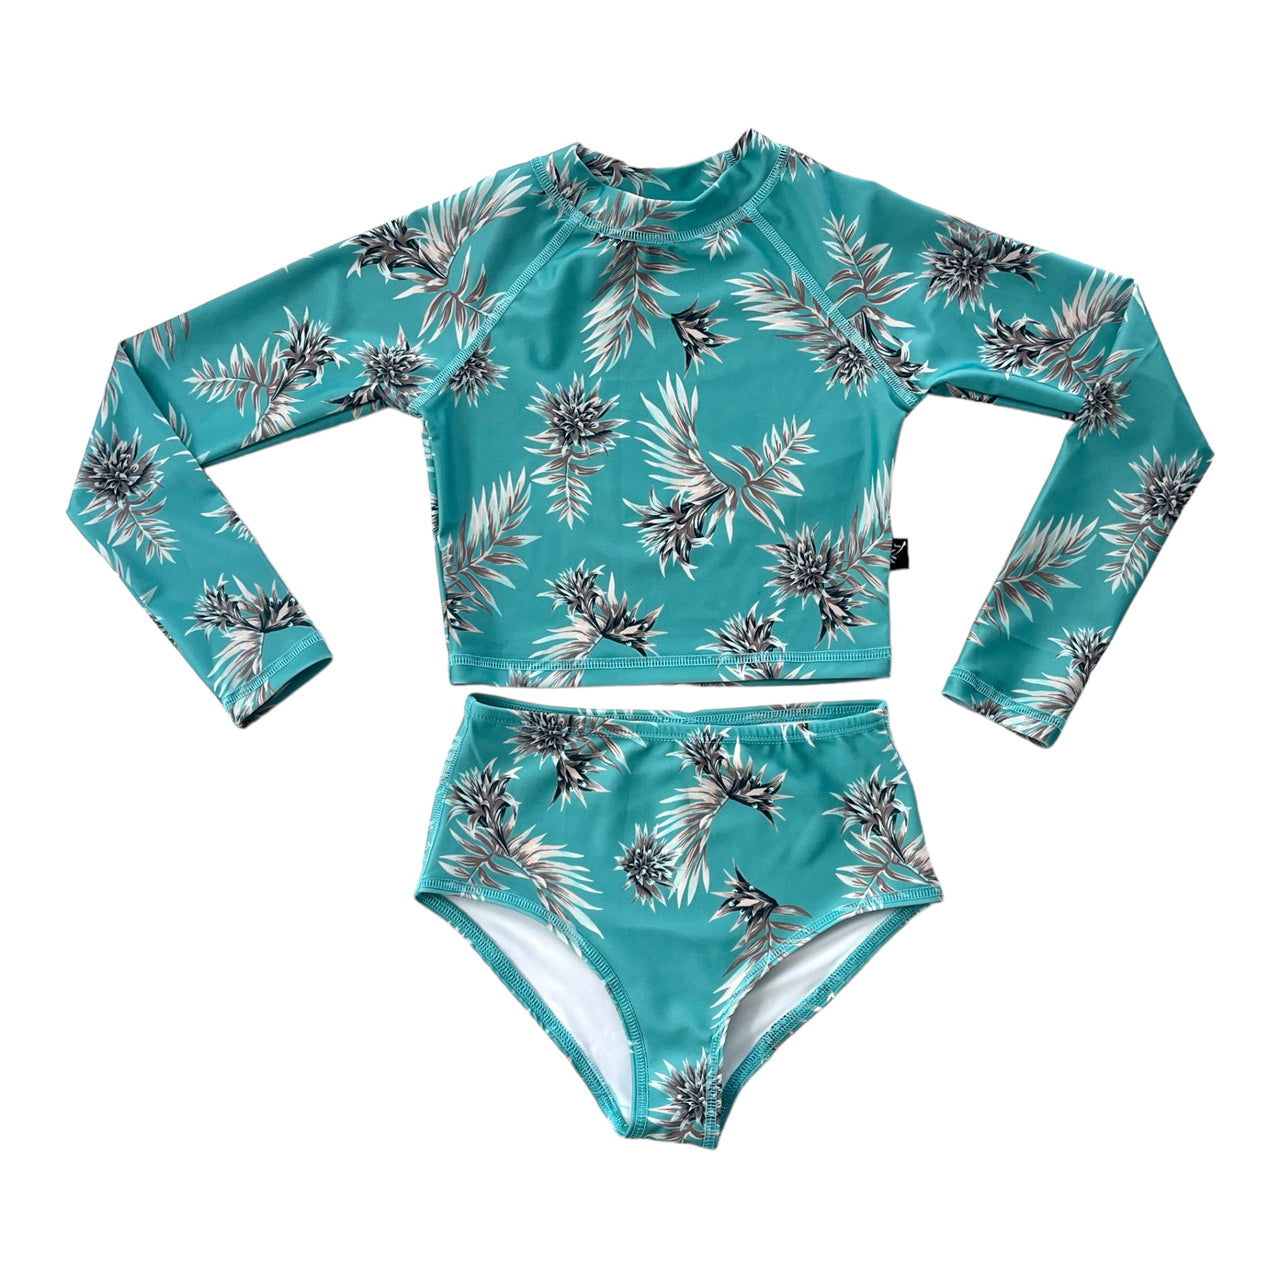 Girl's Two Piece SHRED Suit